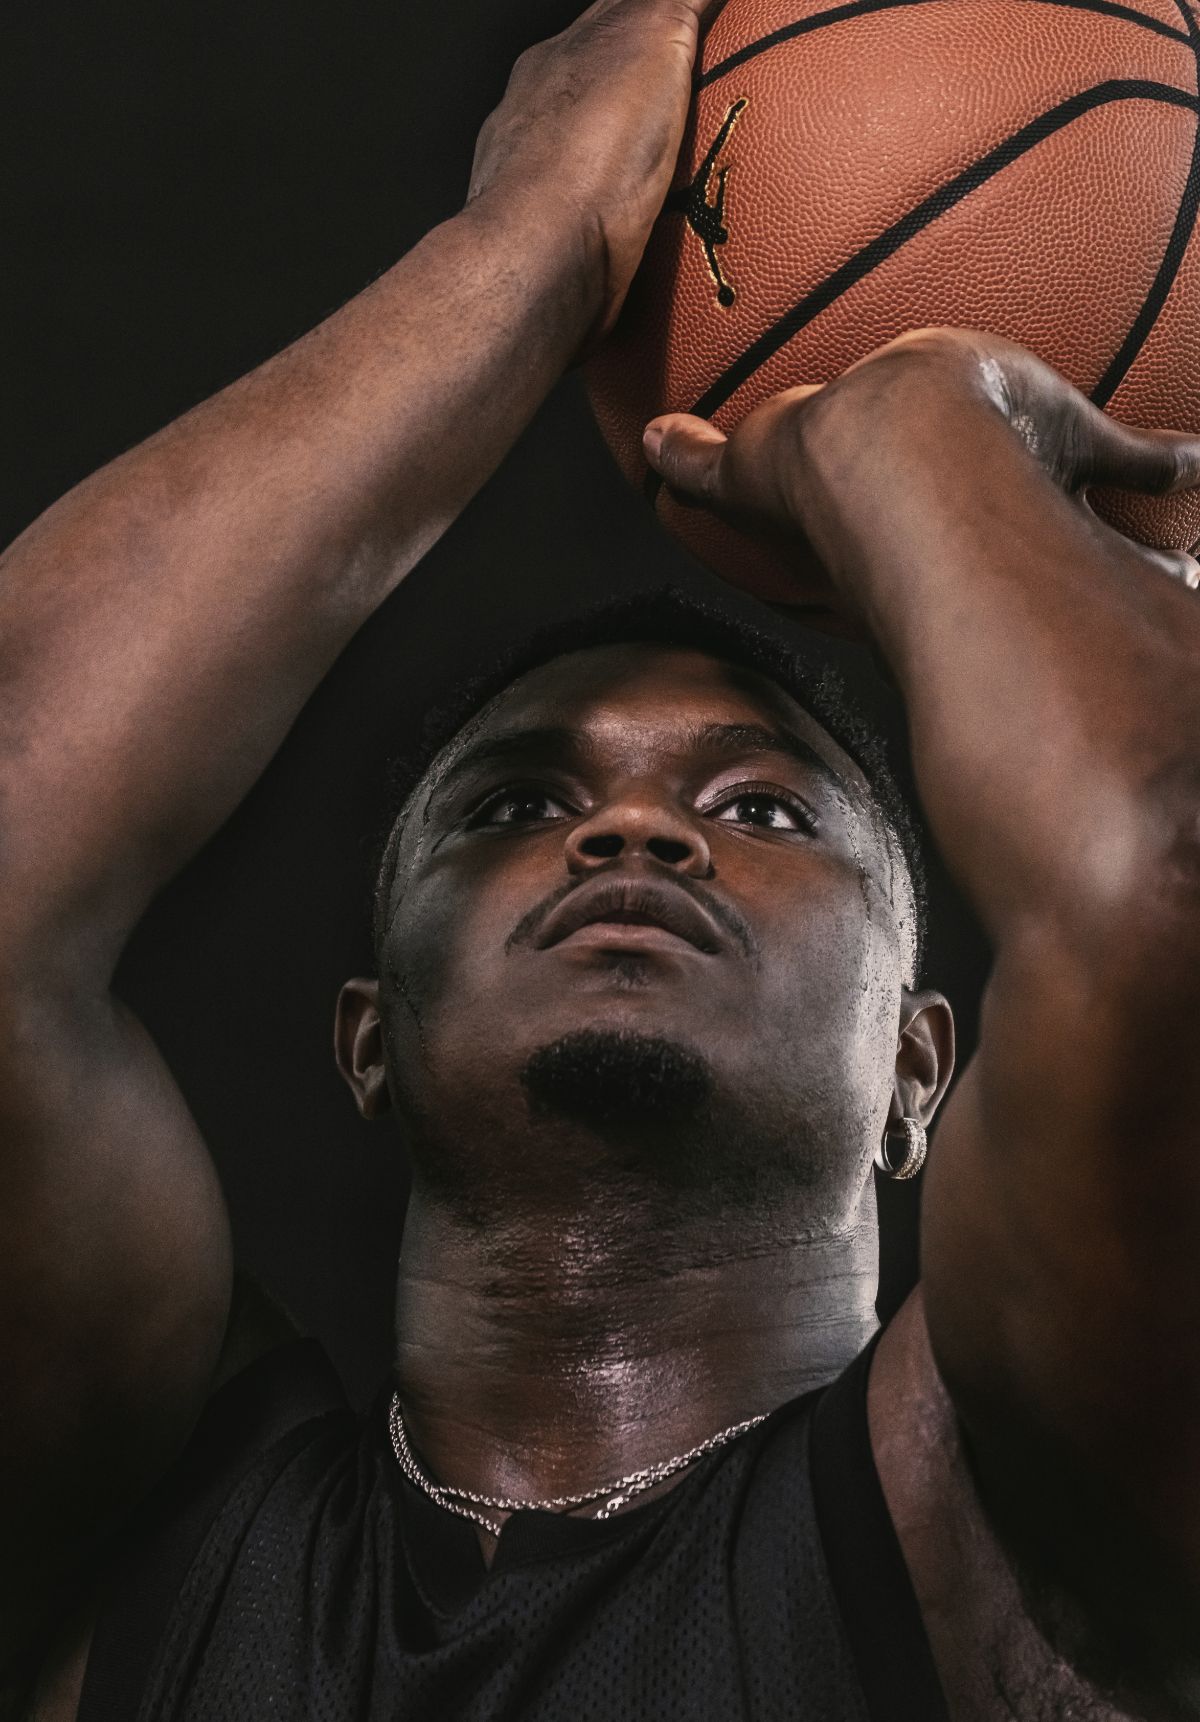 Close up of Zion's face as he sets up to shoot basketball